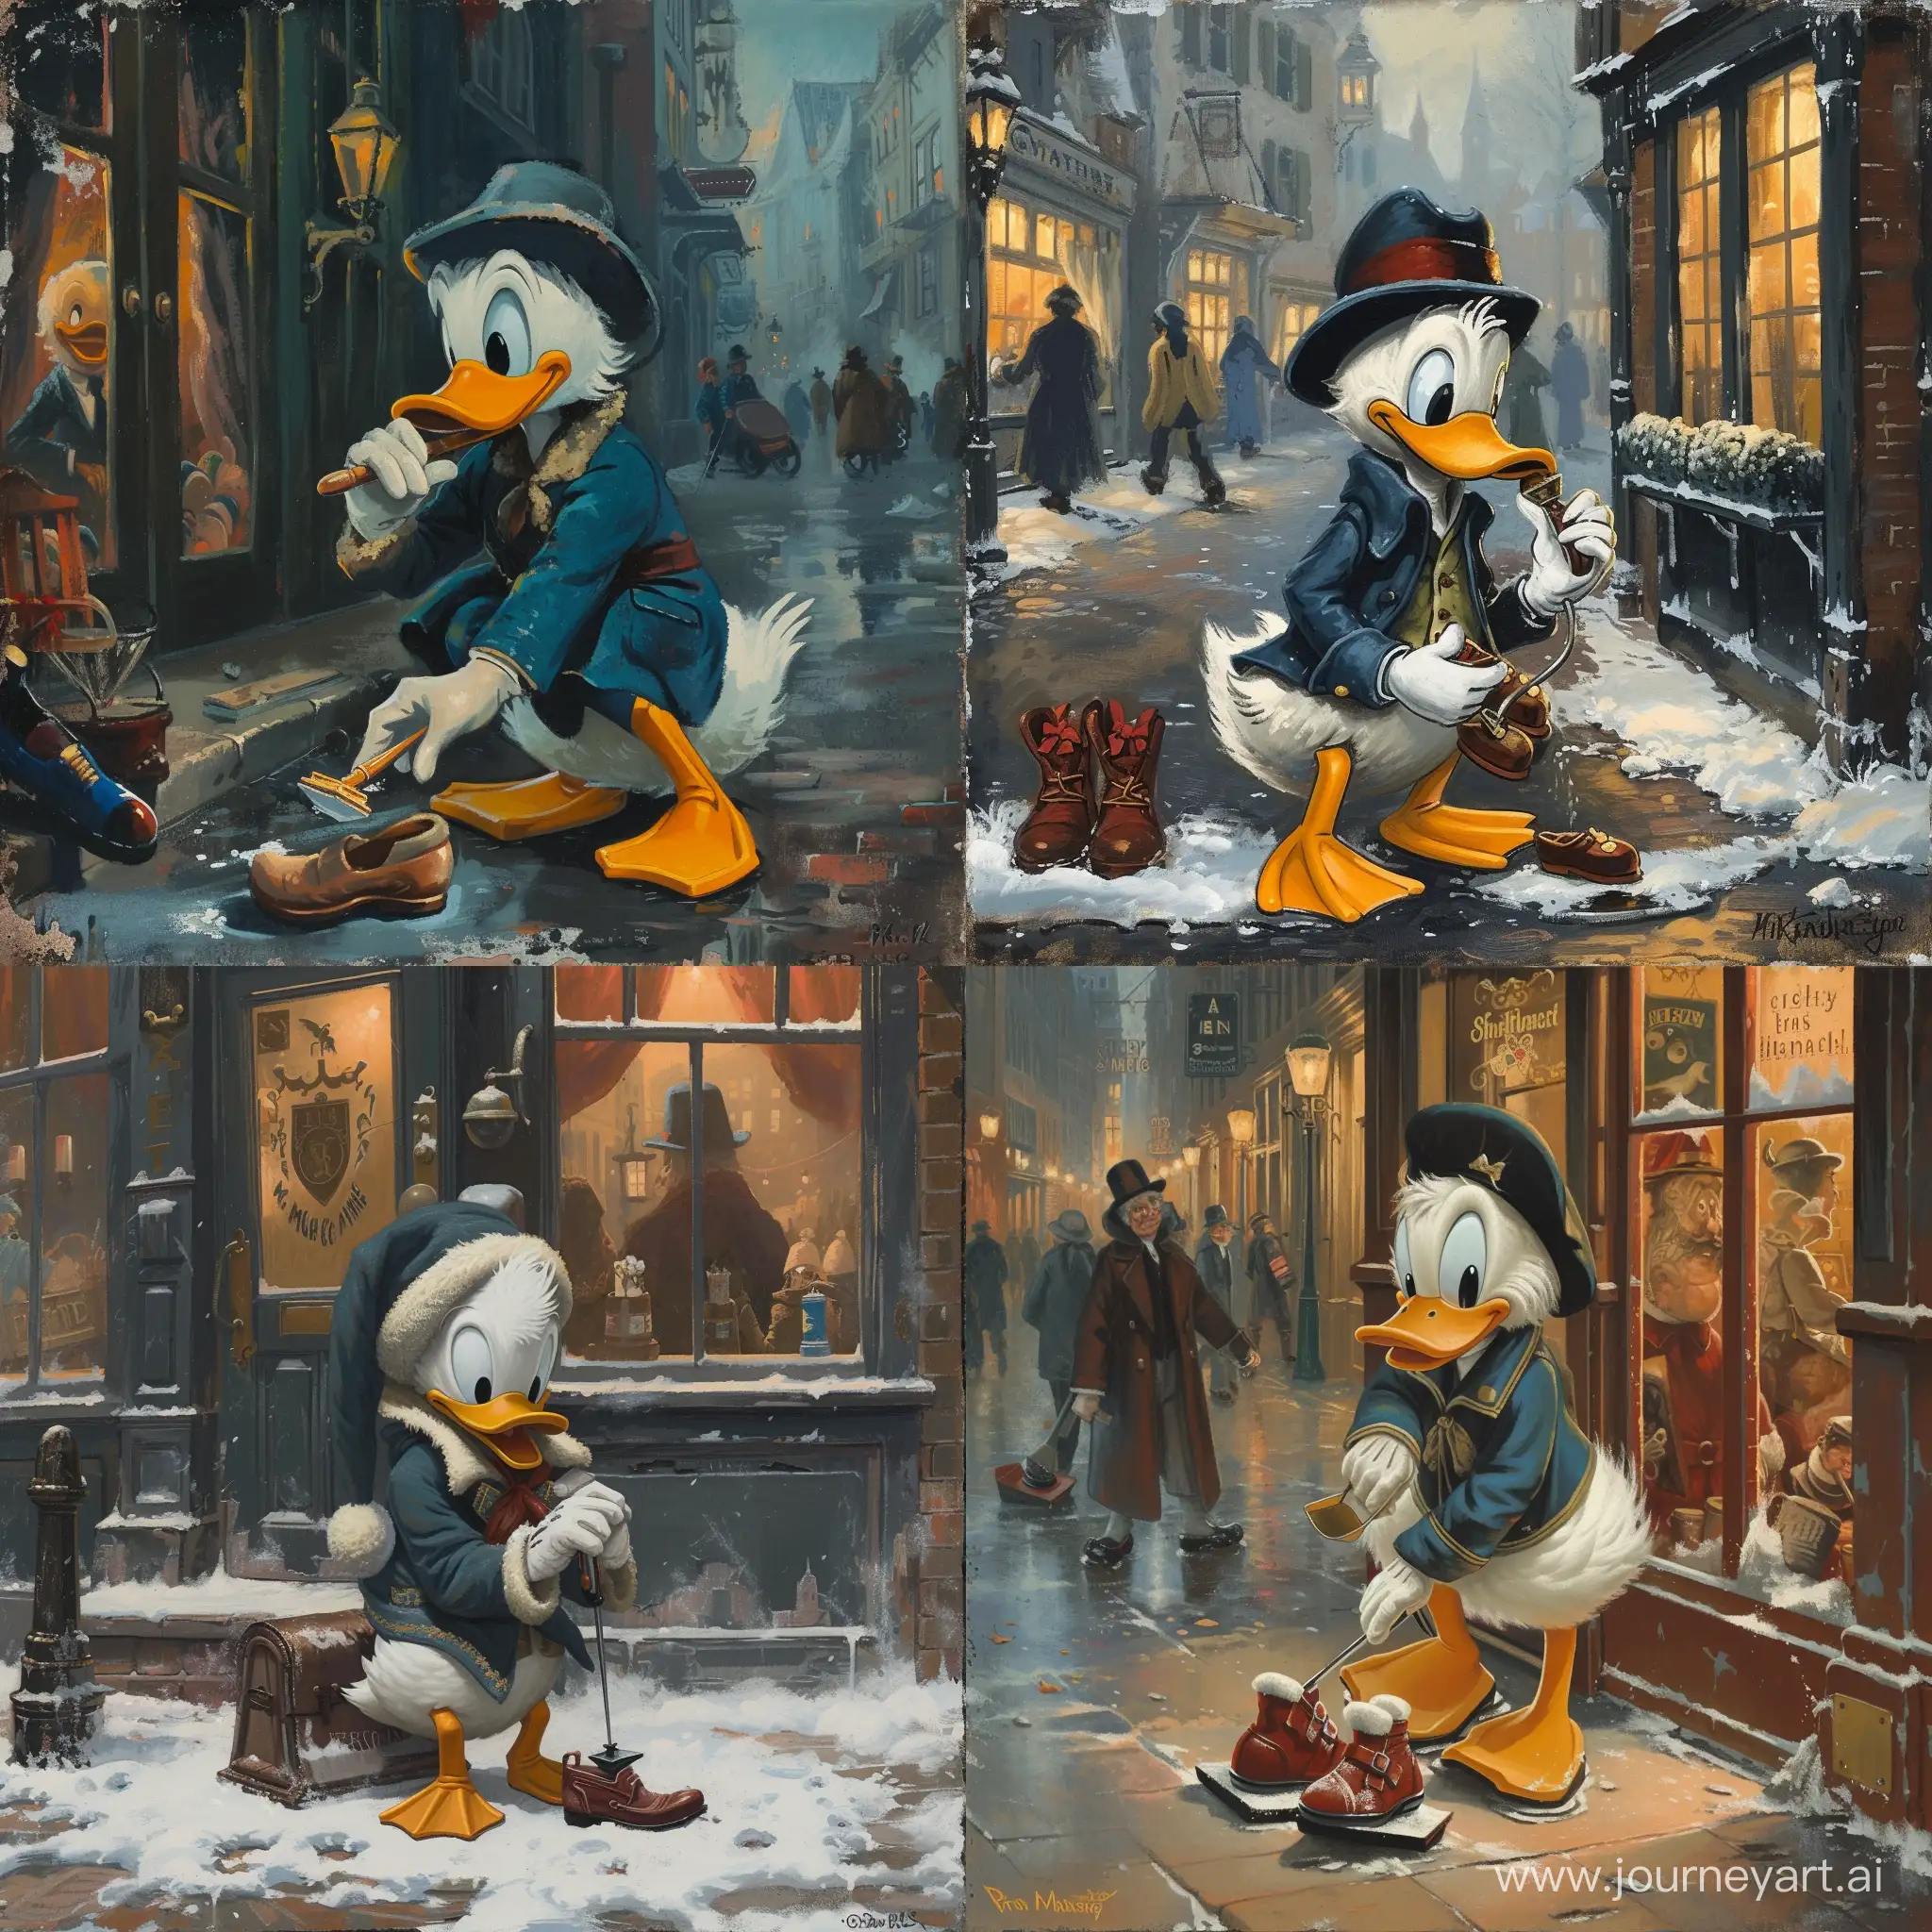 Depicting-Young-Scrooge-McDuck-Polishing-Shoes-in-1930s-Street-Scene